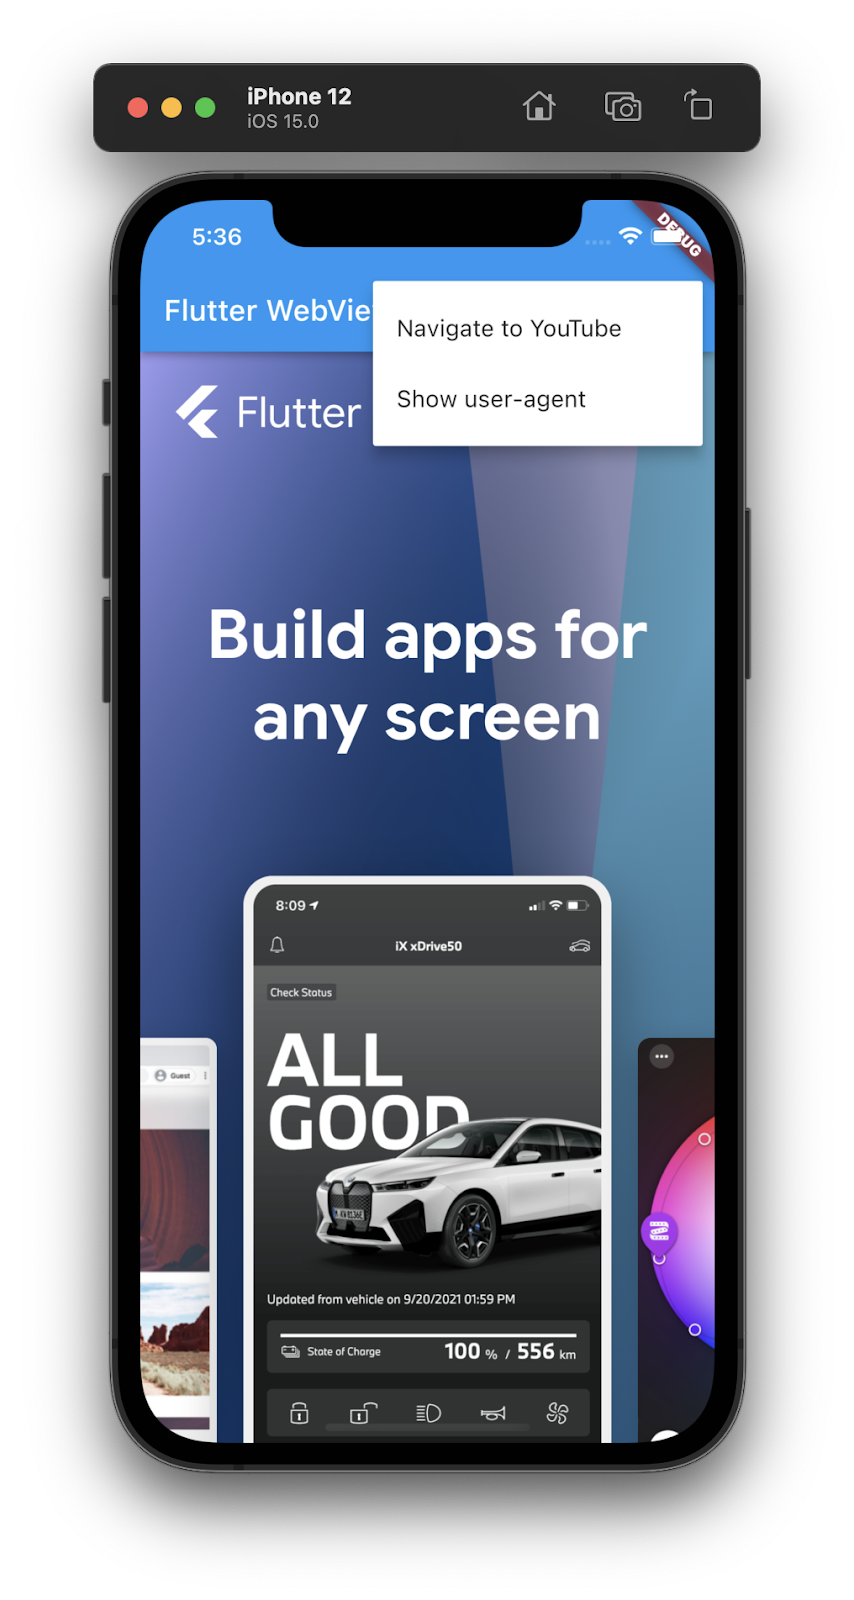 A screen shot of an iPhone simulator running a Flutter app with an embedded webview showing the Flutter.dev homepage with a menu items showing the options to 'Navigate to YouTube' or 'Show user-agent'